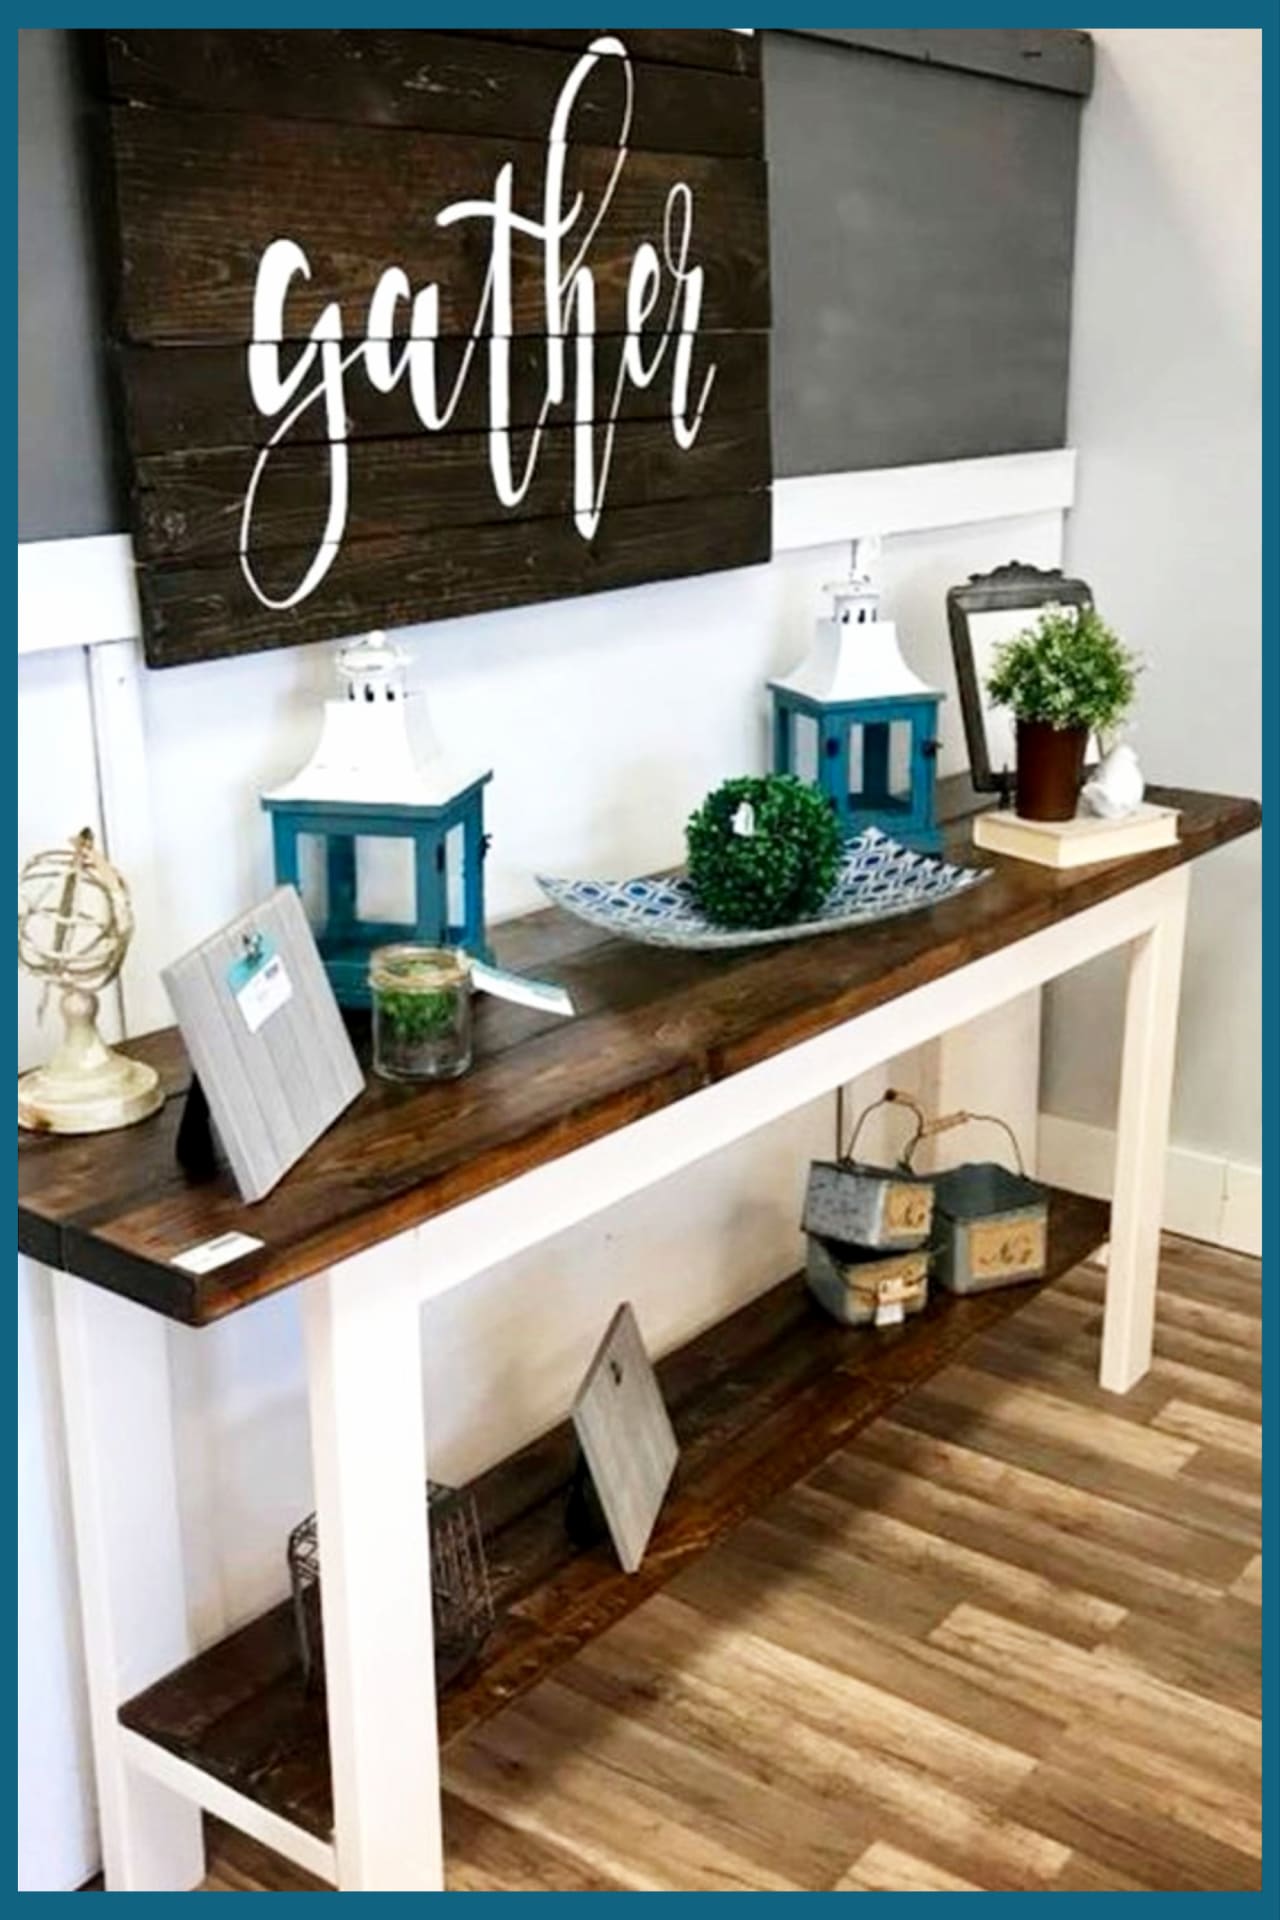 Foyer decorating ideas - small farmhouse foyer with entryway table, pallet gather wall decor and farmhouse style